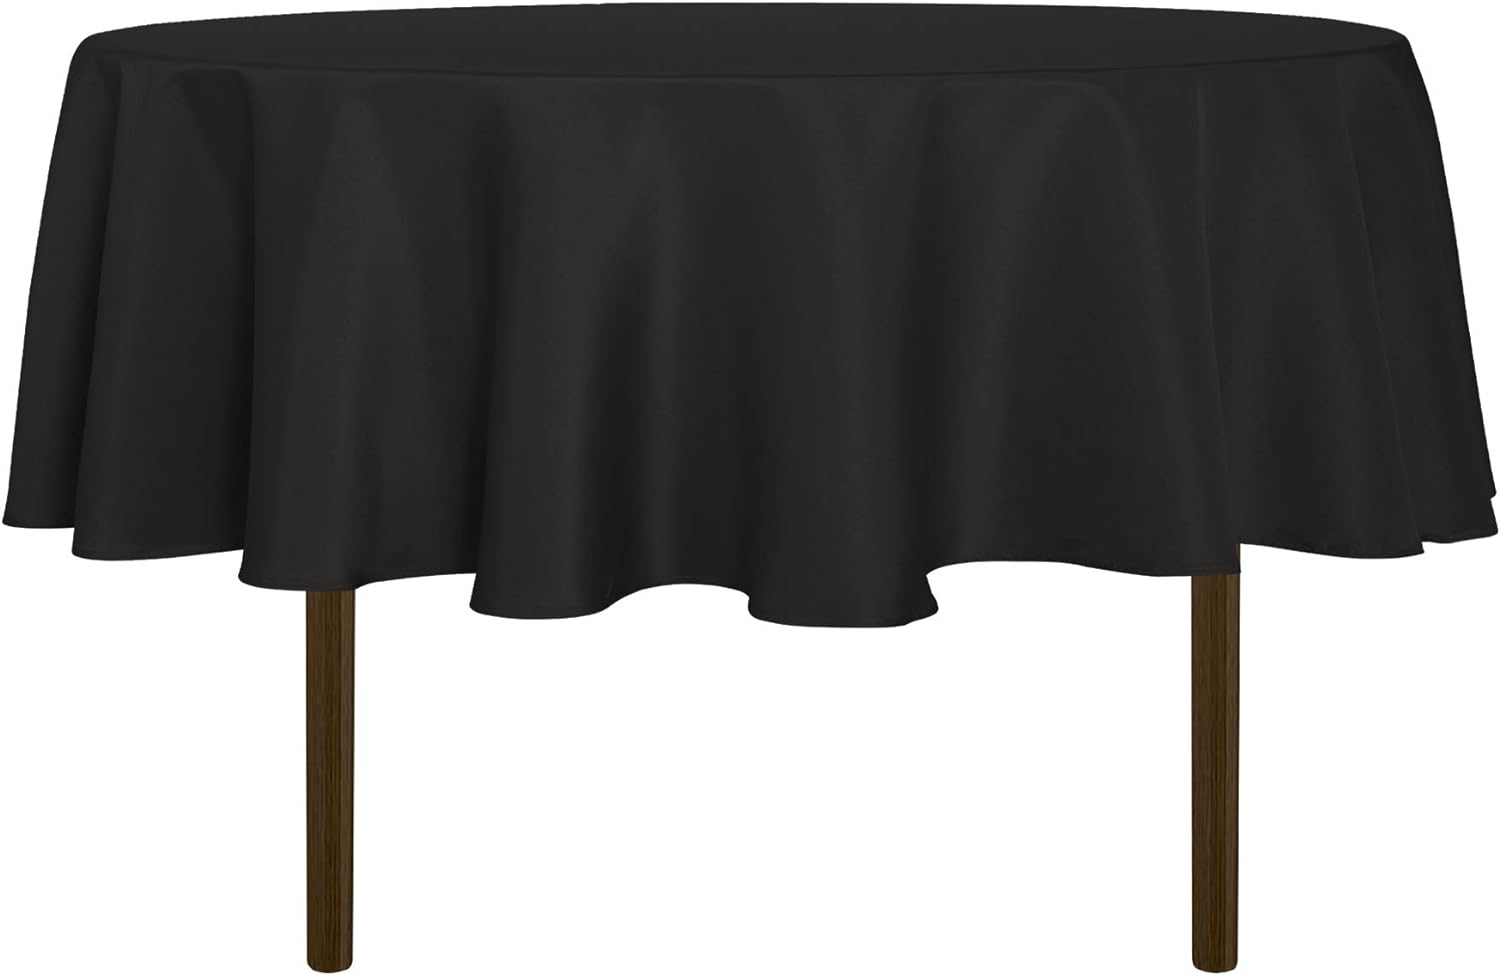 sancua Round Tablecloth - 60 Inch - Water Resistant Spill Proof Washable Polyester Table Cloth Decorative Fabric Table Cover for Dining Table, Buffet Parties and Camping, Black